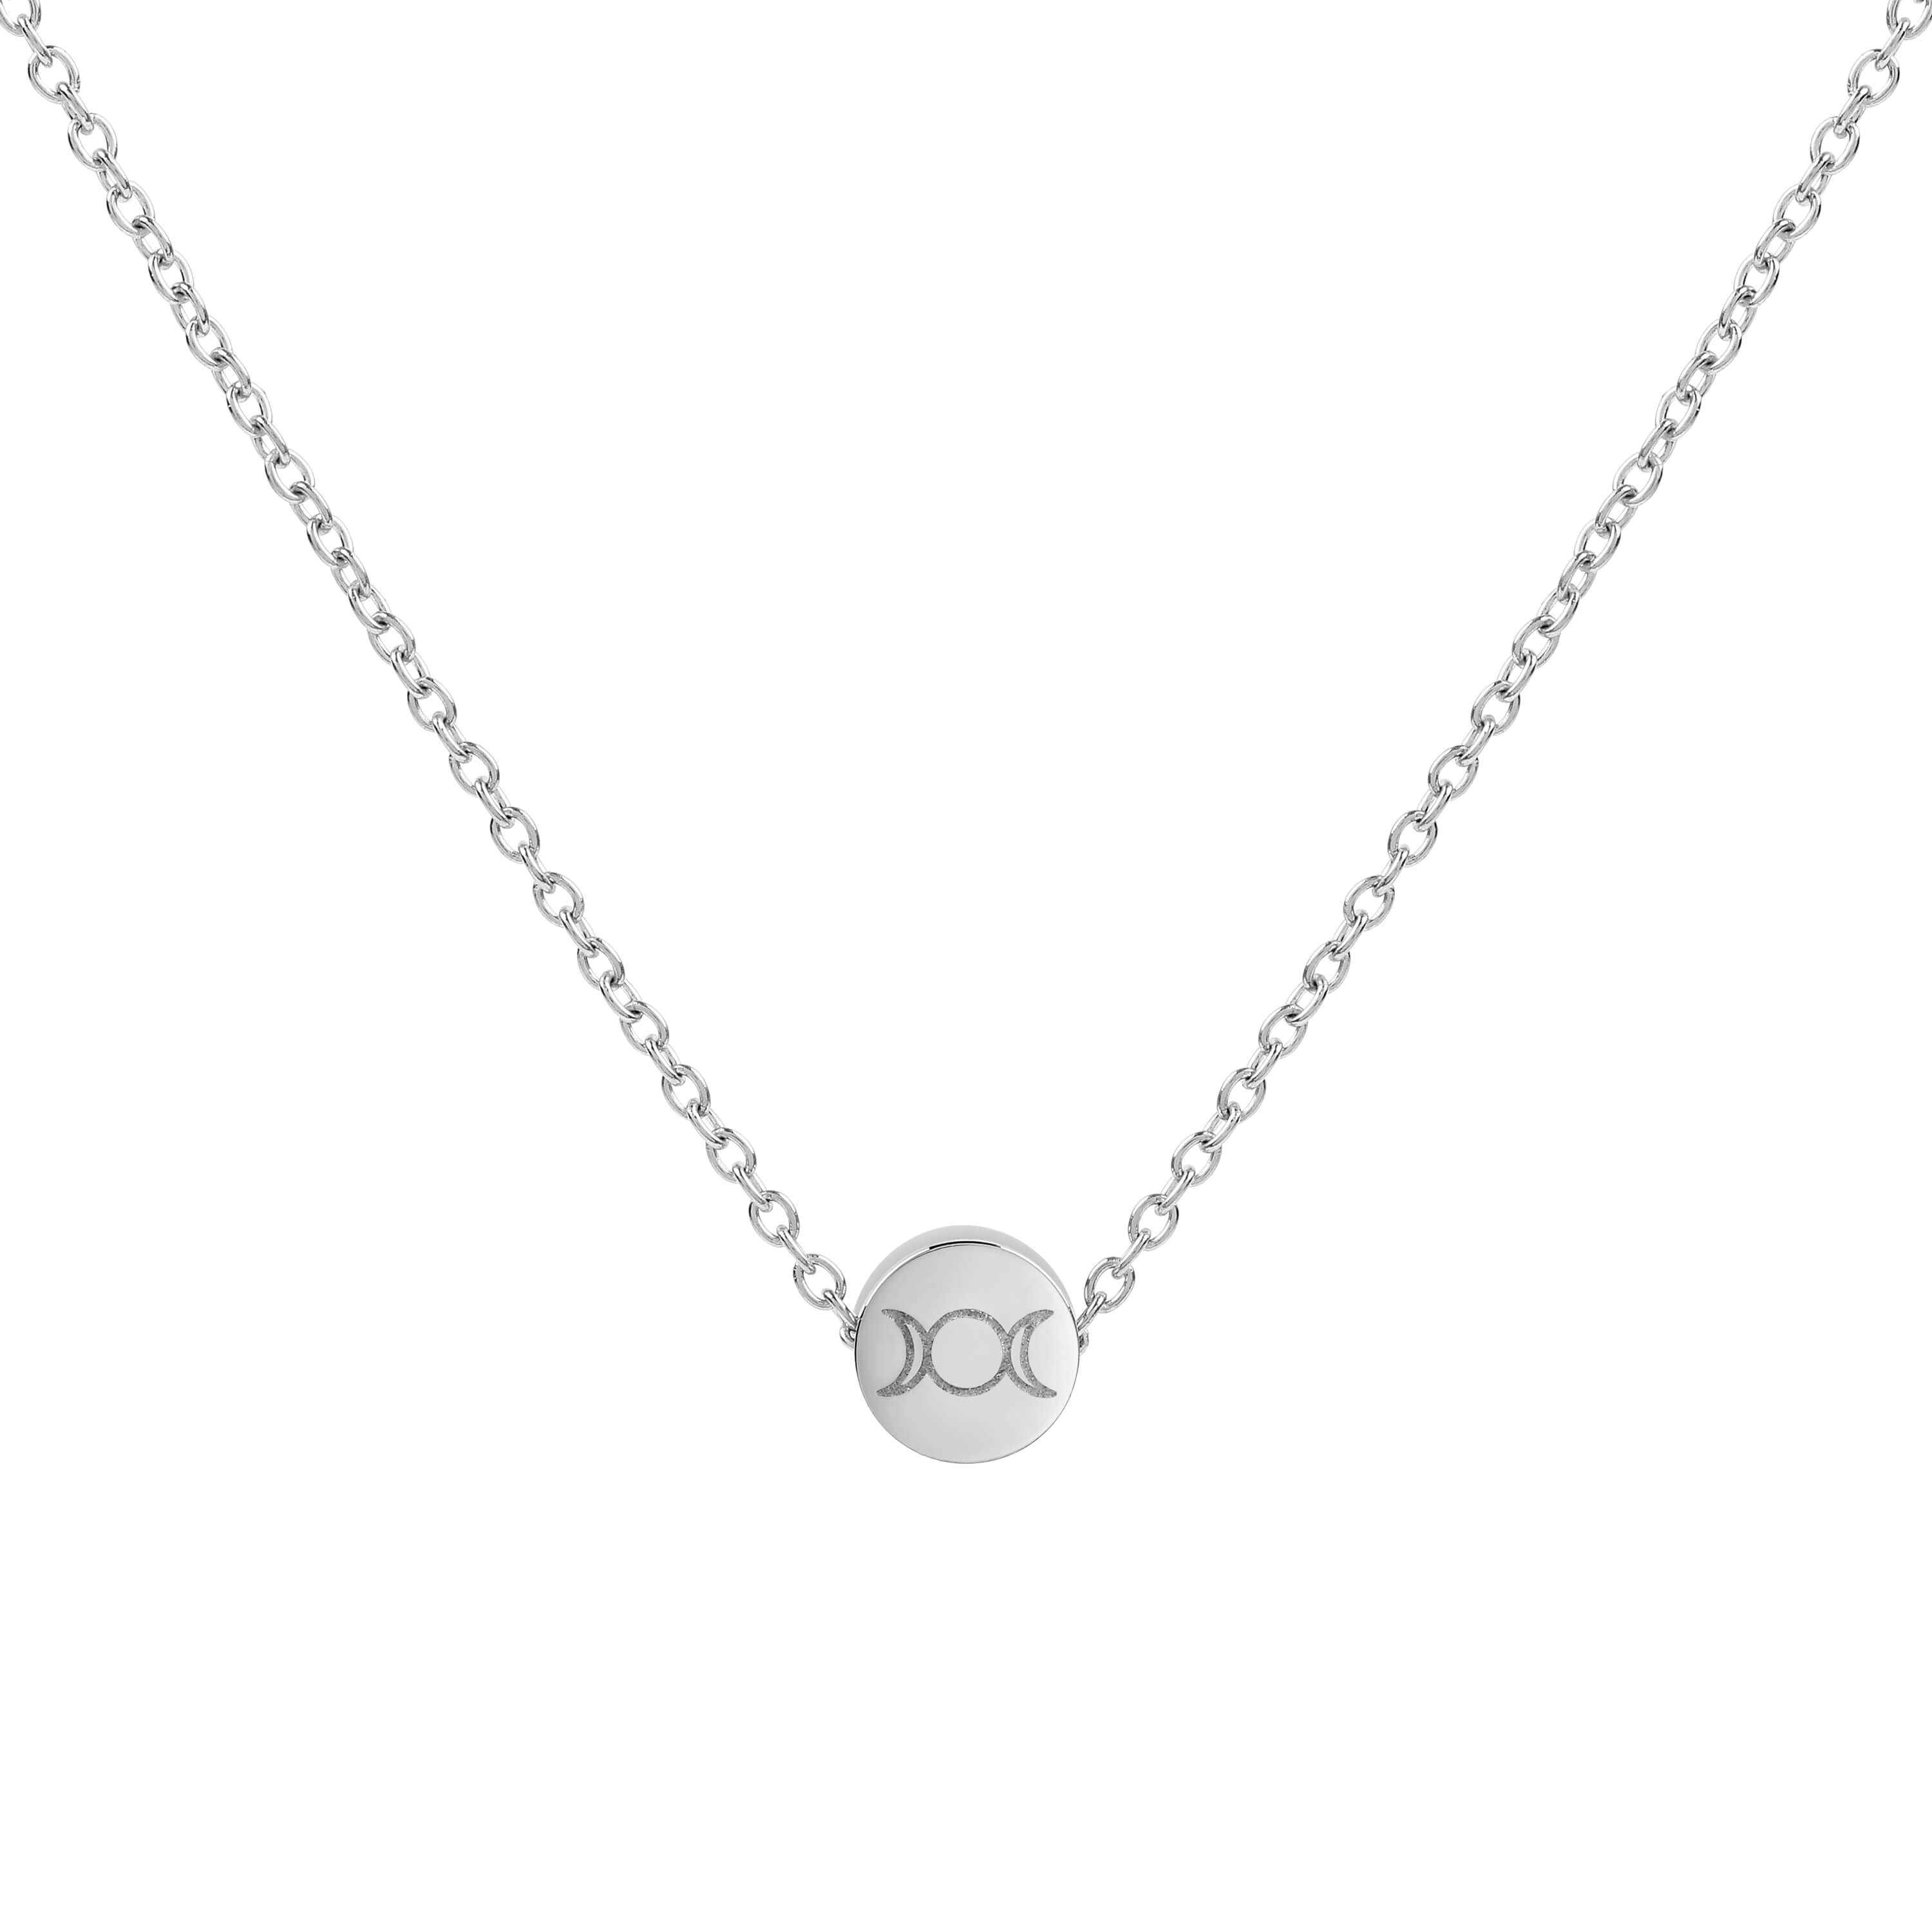 Triple Goddess Mini Pendant Necklace - Silver Stainless Steel